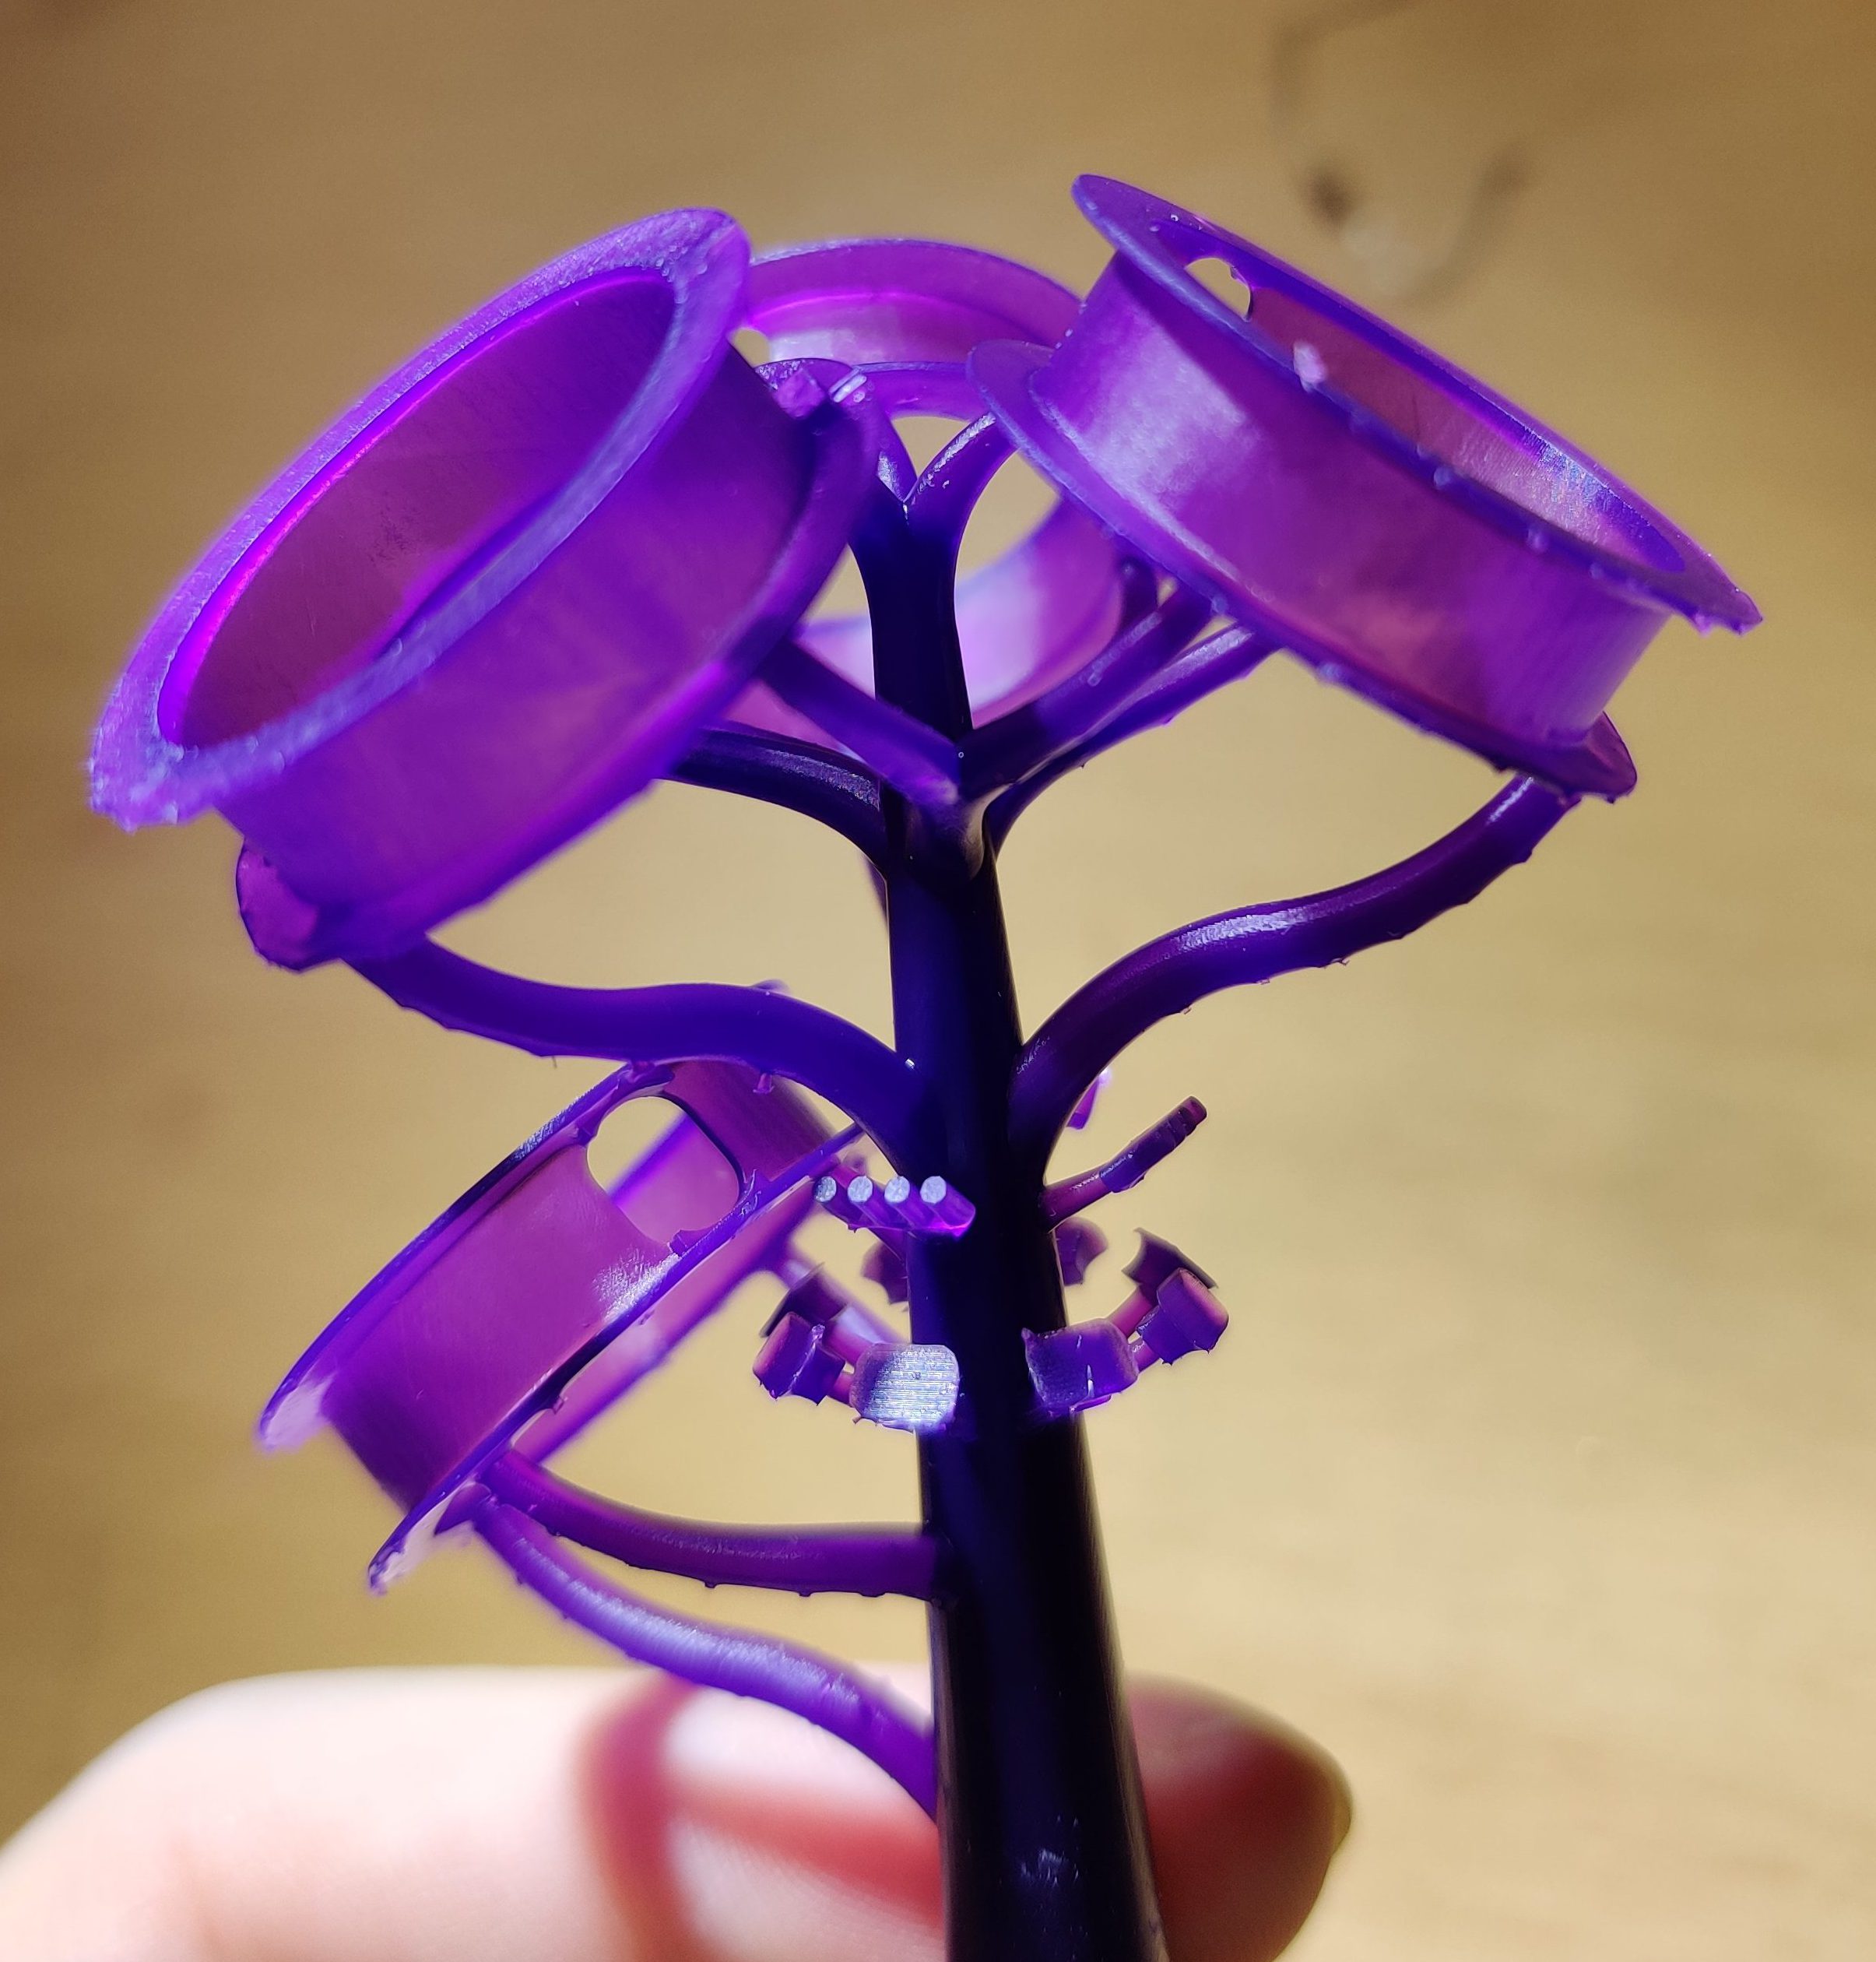 3D Printed Casting Tree, Close up.